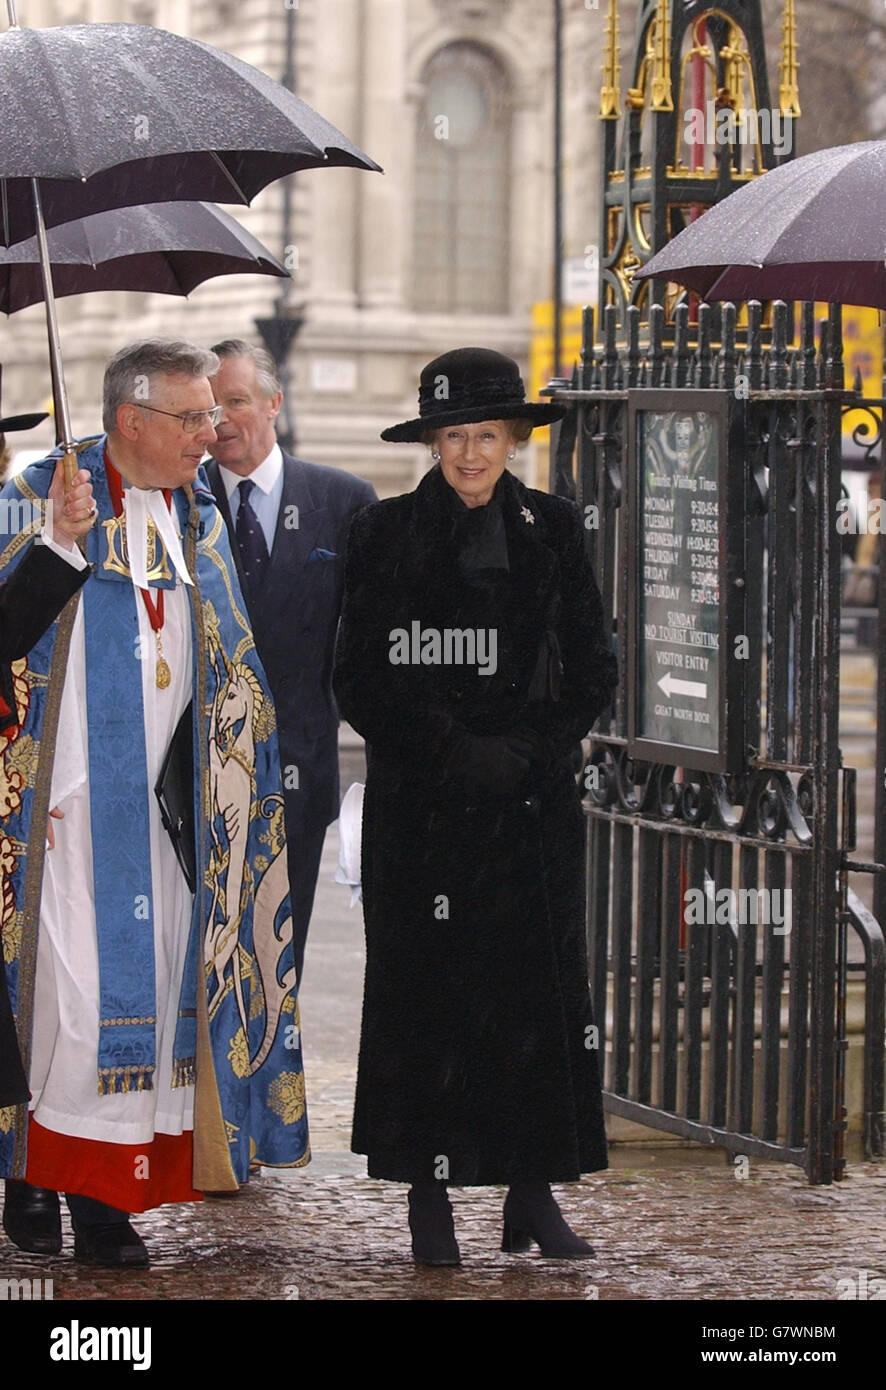 Die richtige Honorable Sir Angus Ogilvy - Service von Thanksgiving - Westminster Abbey Stockfoto